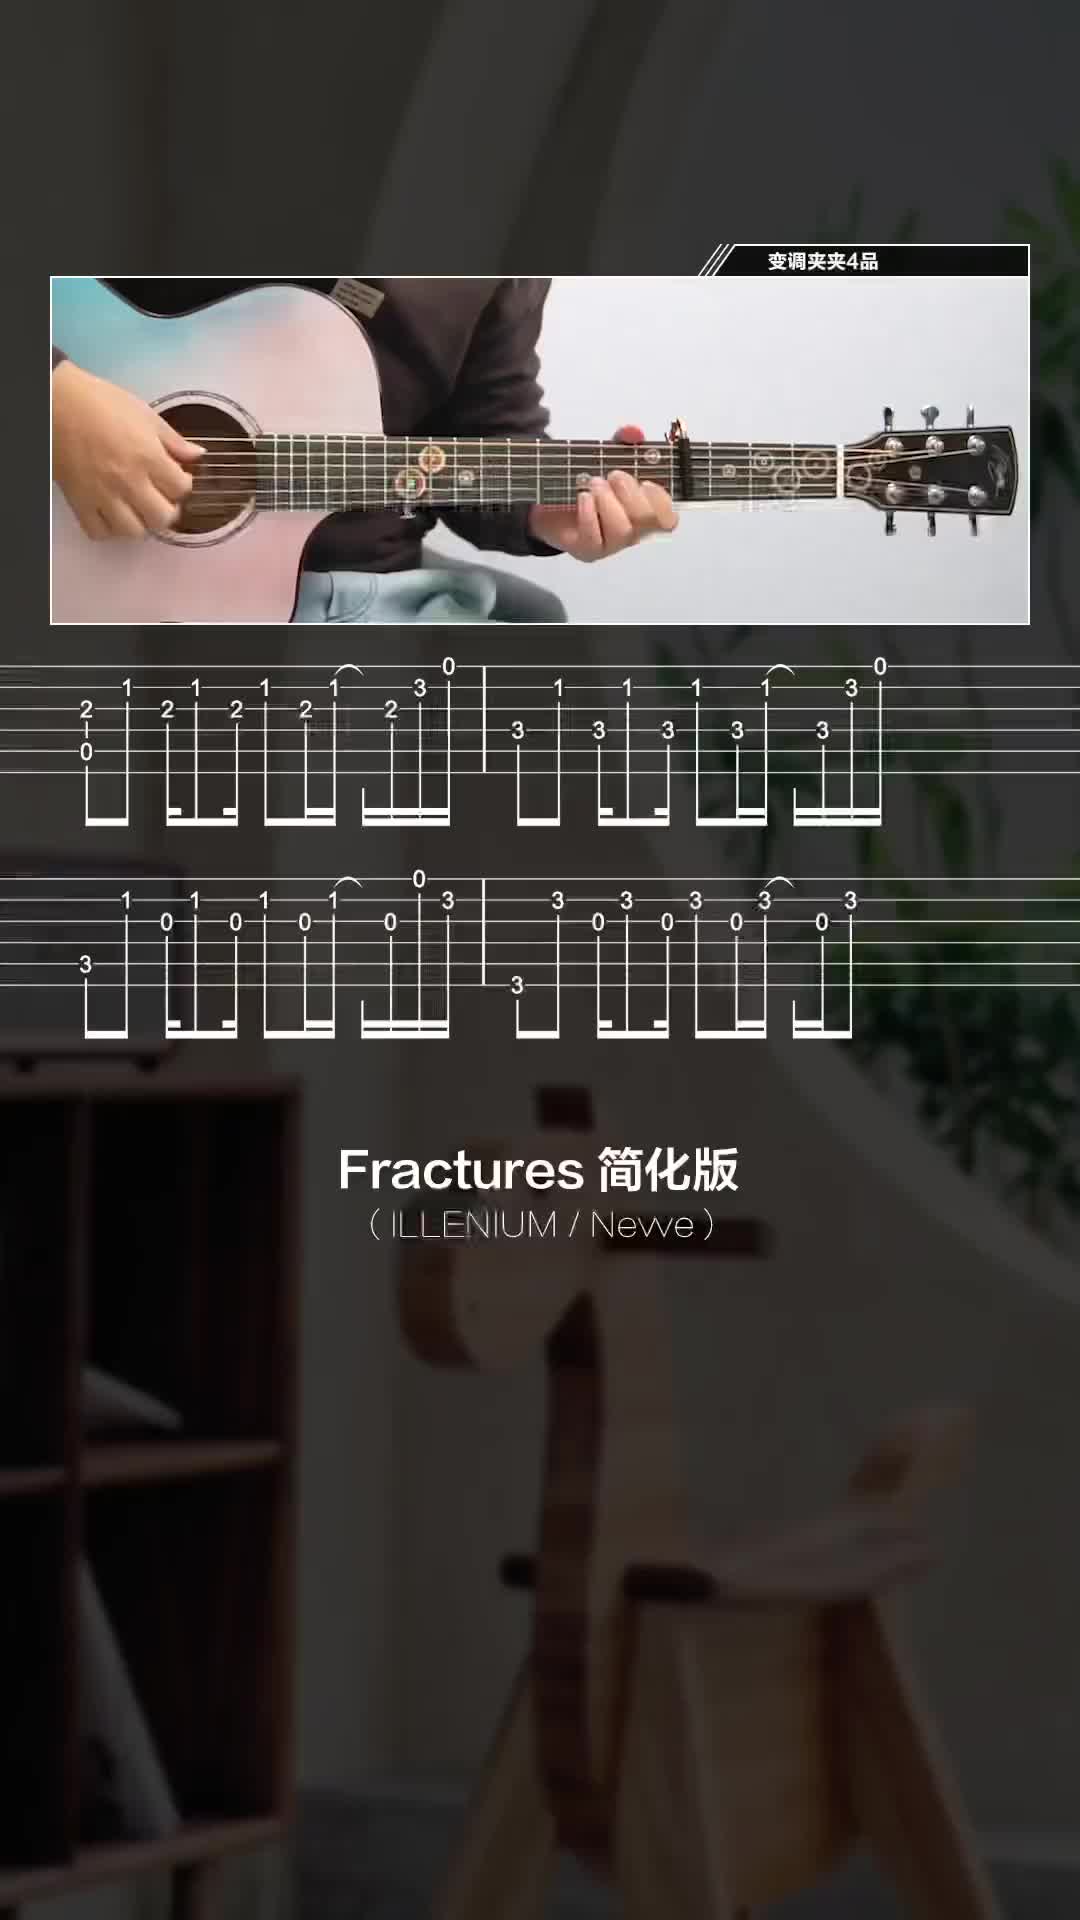 fractures指弹吉他谱图片